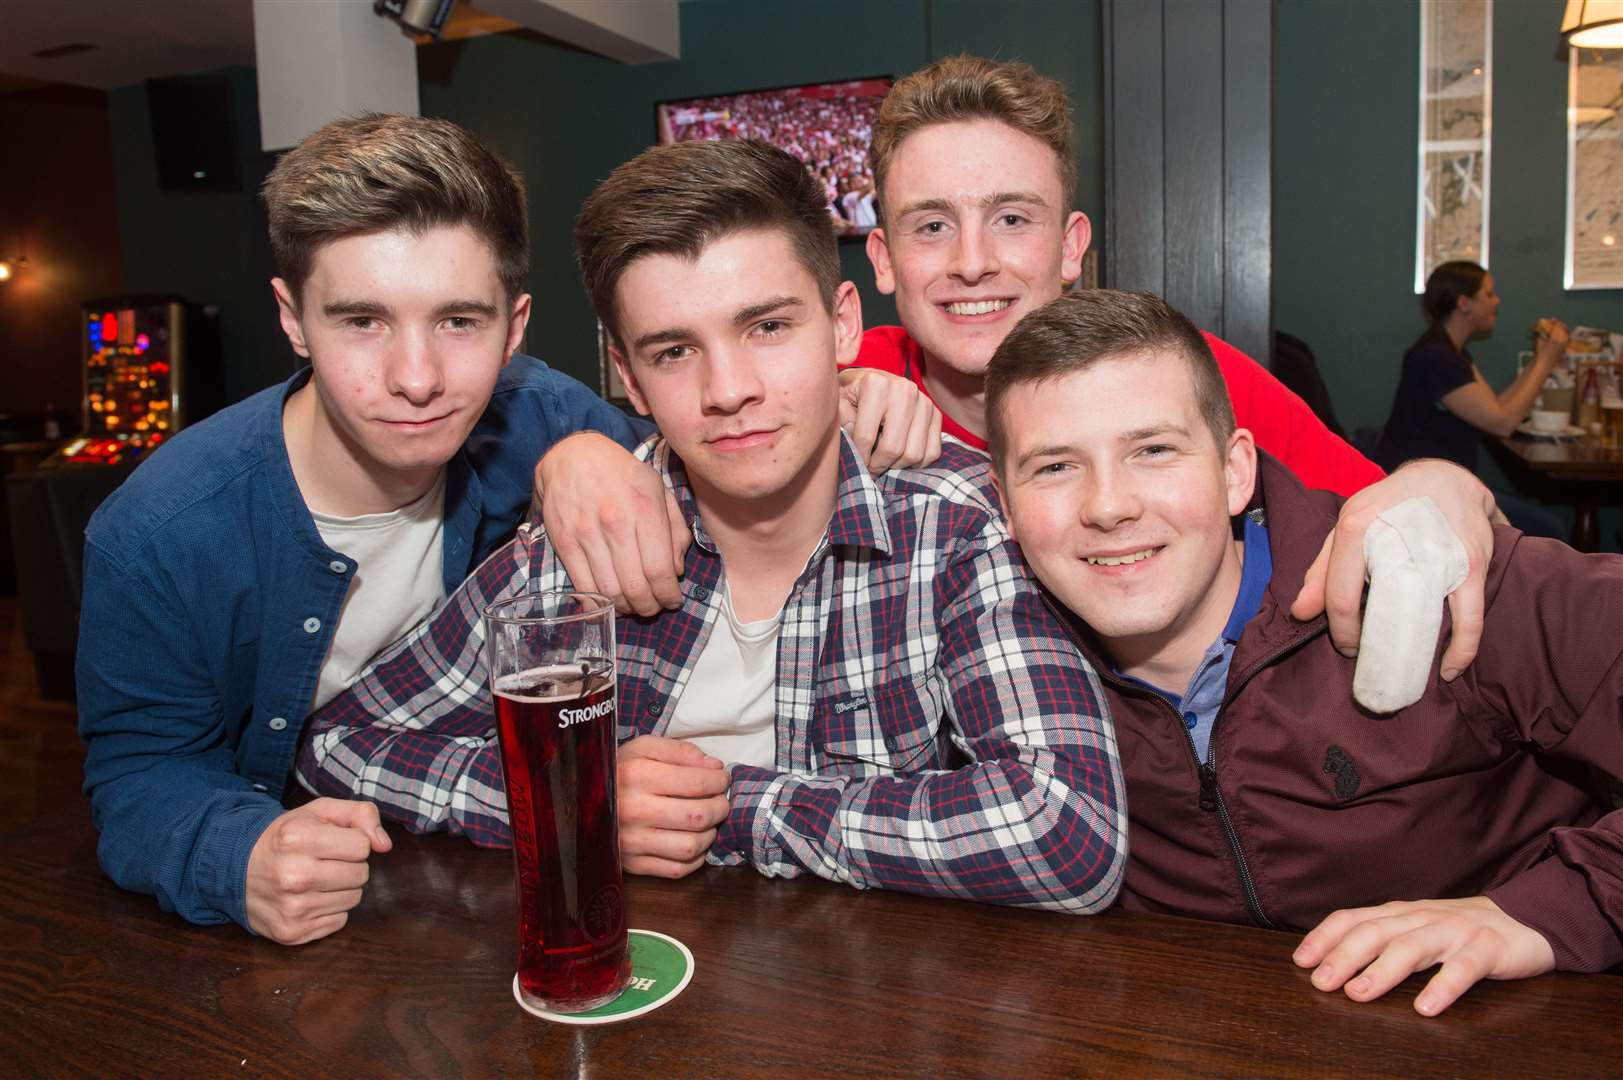 Lads night out for (left to right) Liam Macleod, Ruairidh Fraser, Steven Macleod and Murdo Johnstone.